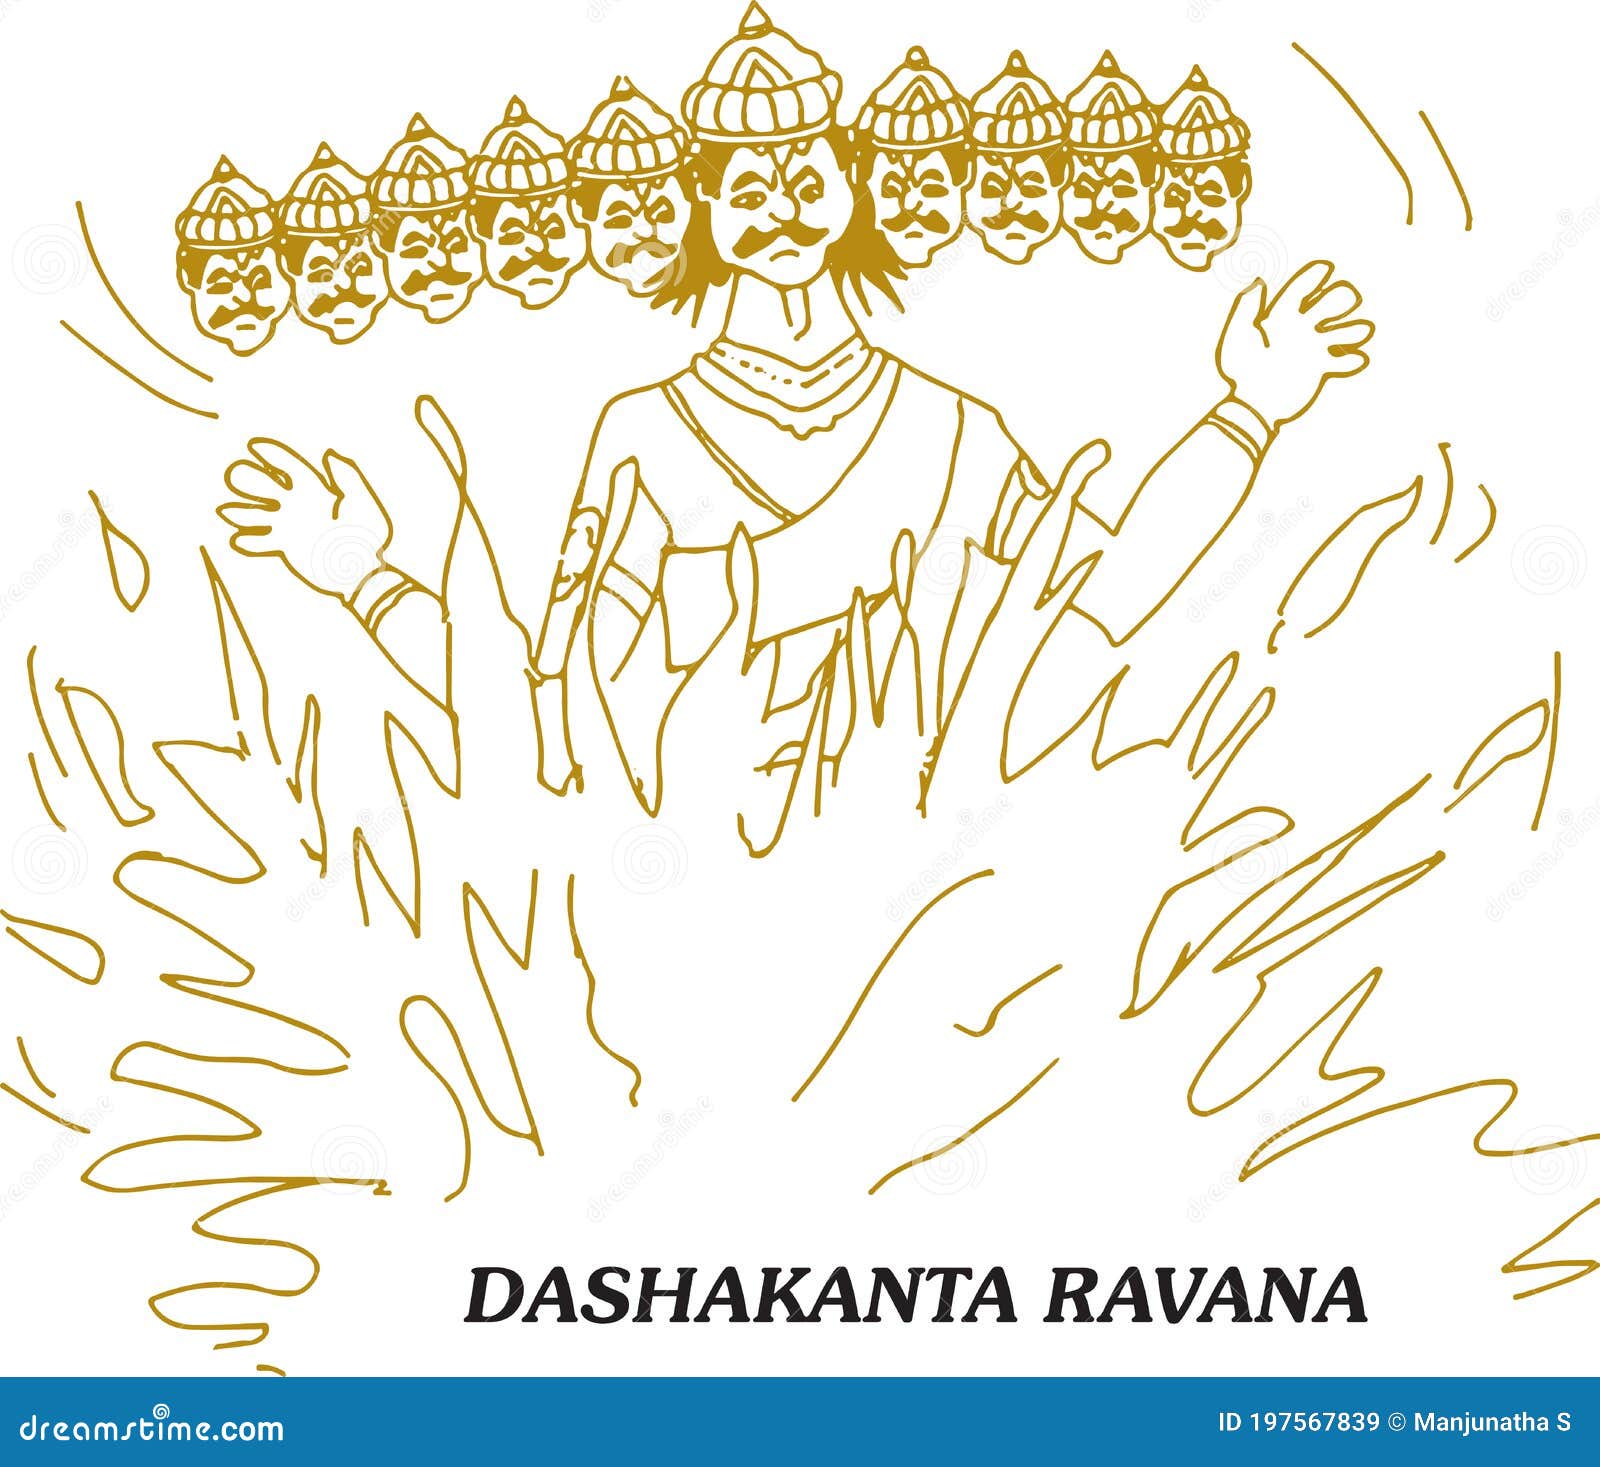 Happy Dussehra Drawing // How To Draw Dussehra Drawing // Ravan Drawing //  Pencil Drawing | Book art drawings, Book art, Drawings